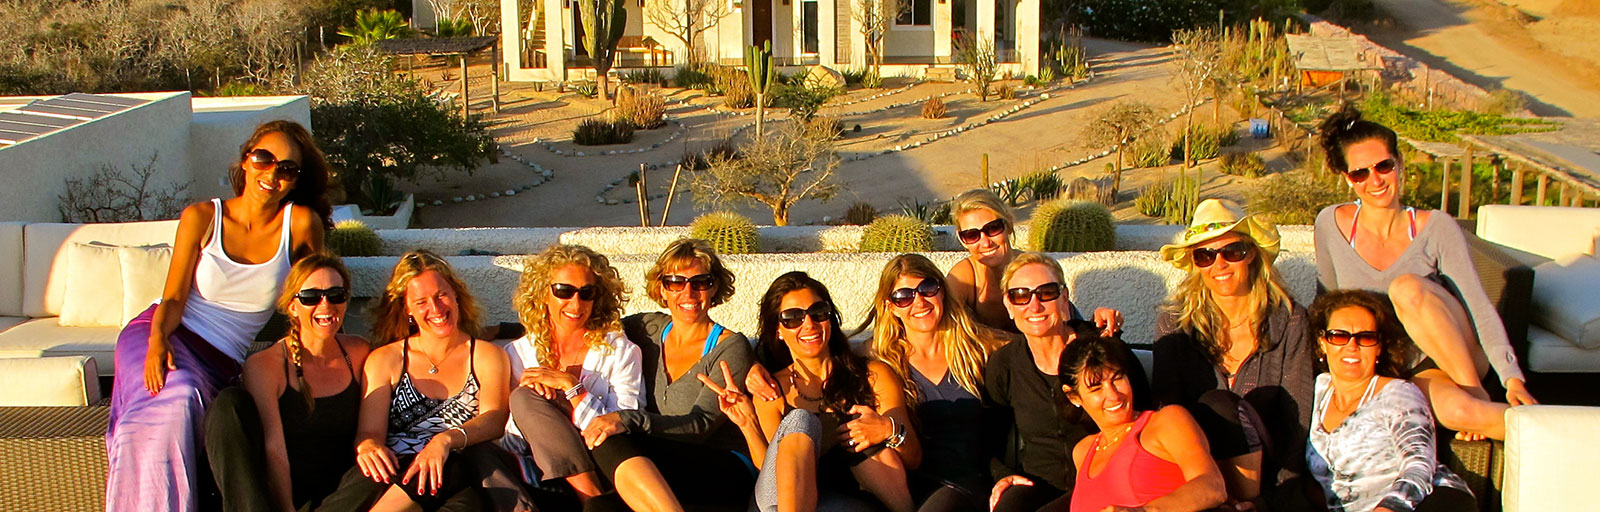 Mexico Yoga Retreats: Sunset on the Roof Deck